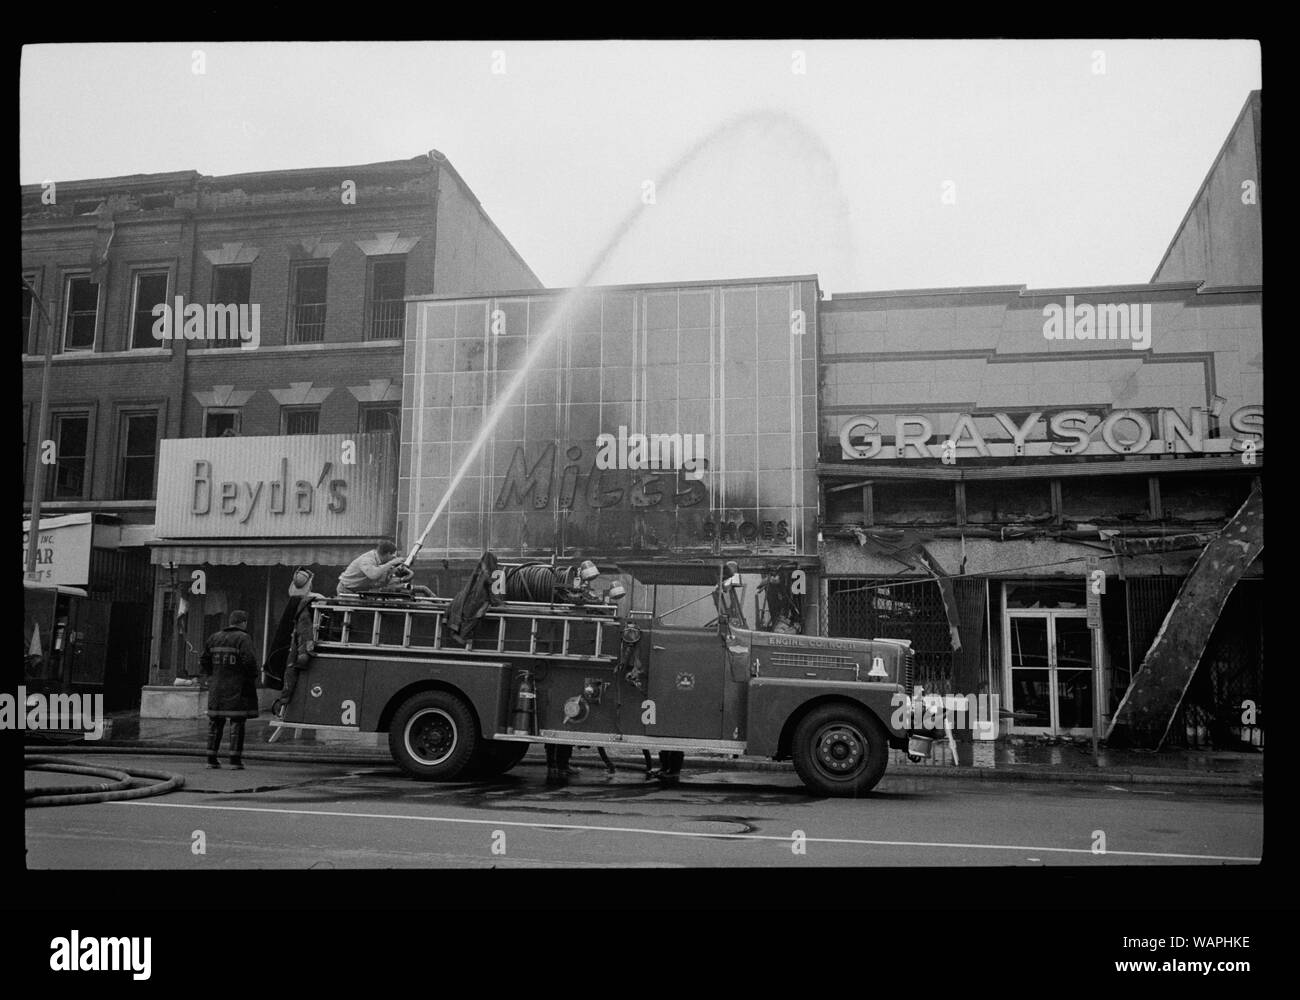 D.C. riot. April '68. Aftermath; English: Photograph showing firefighters spraying water on shops, including Beyda's, Miles Shoes, and Graysons, that were burned during the riots that followed the assassination of Martin Luther King, Jr. Stock Photo